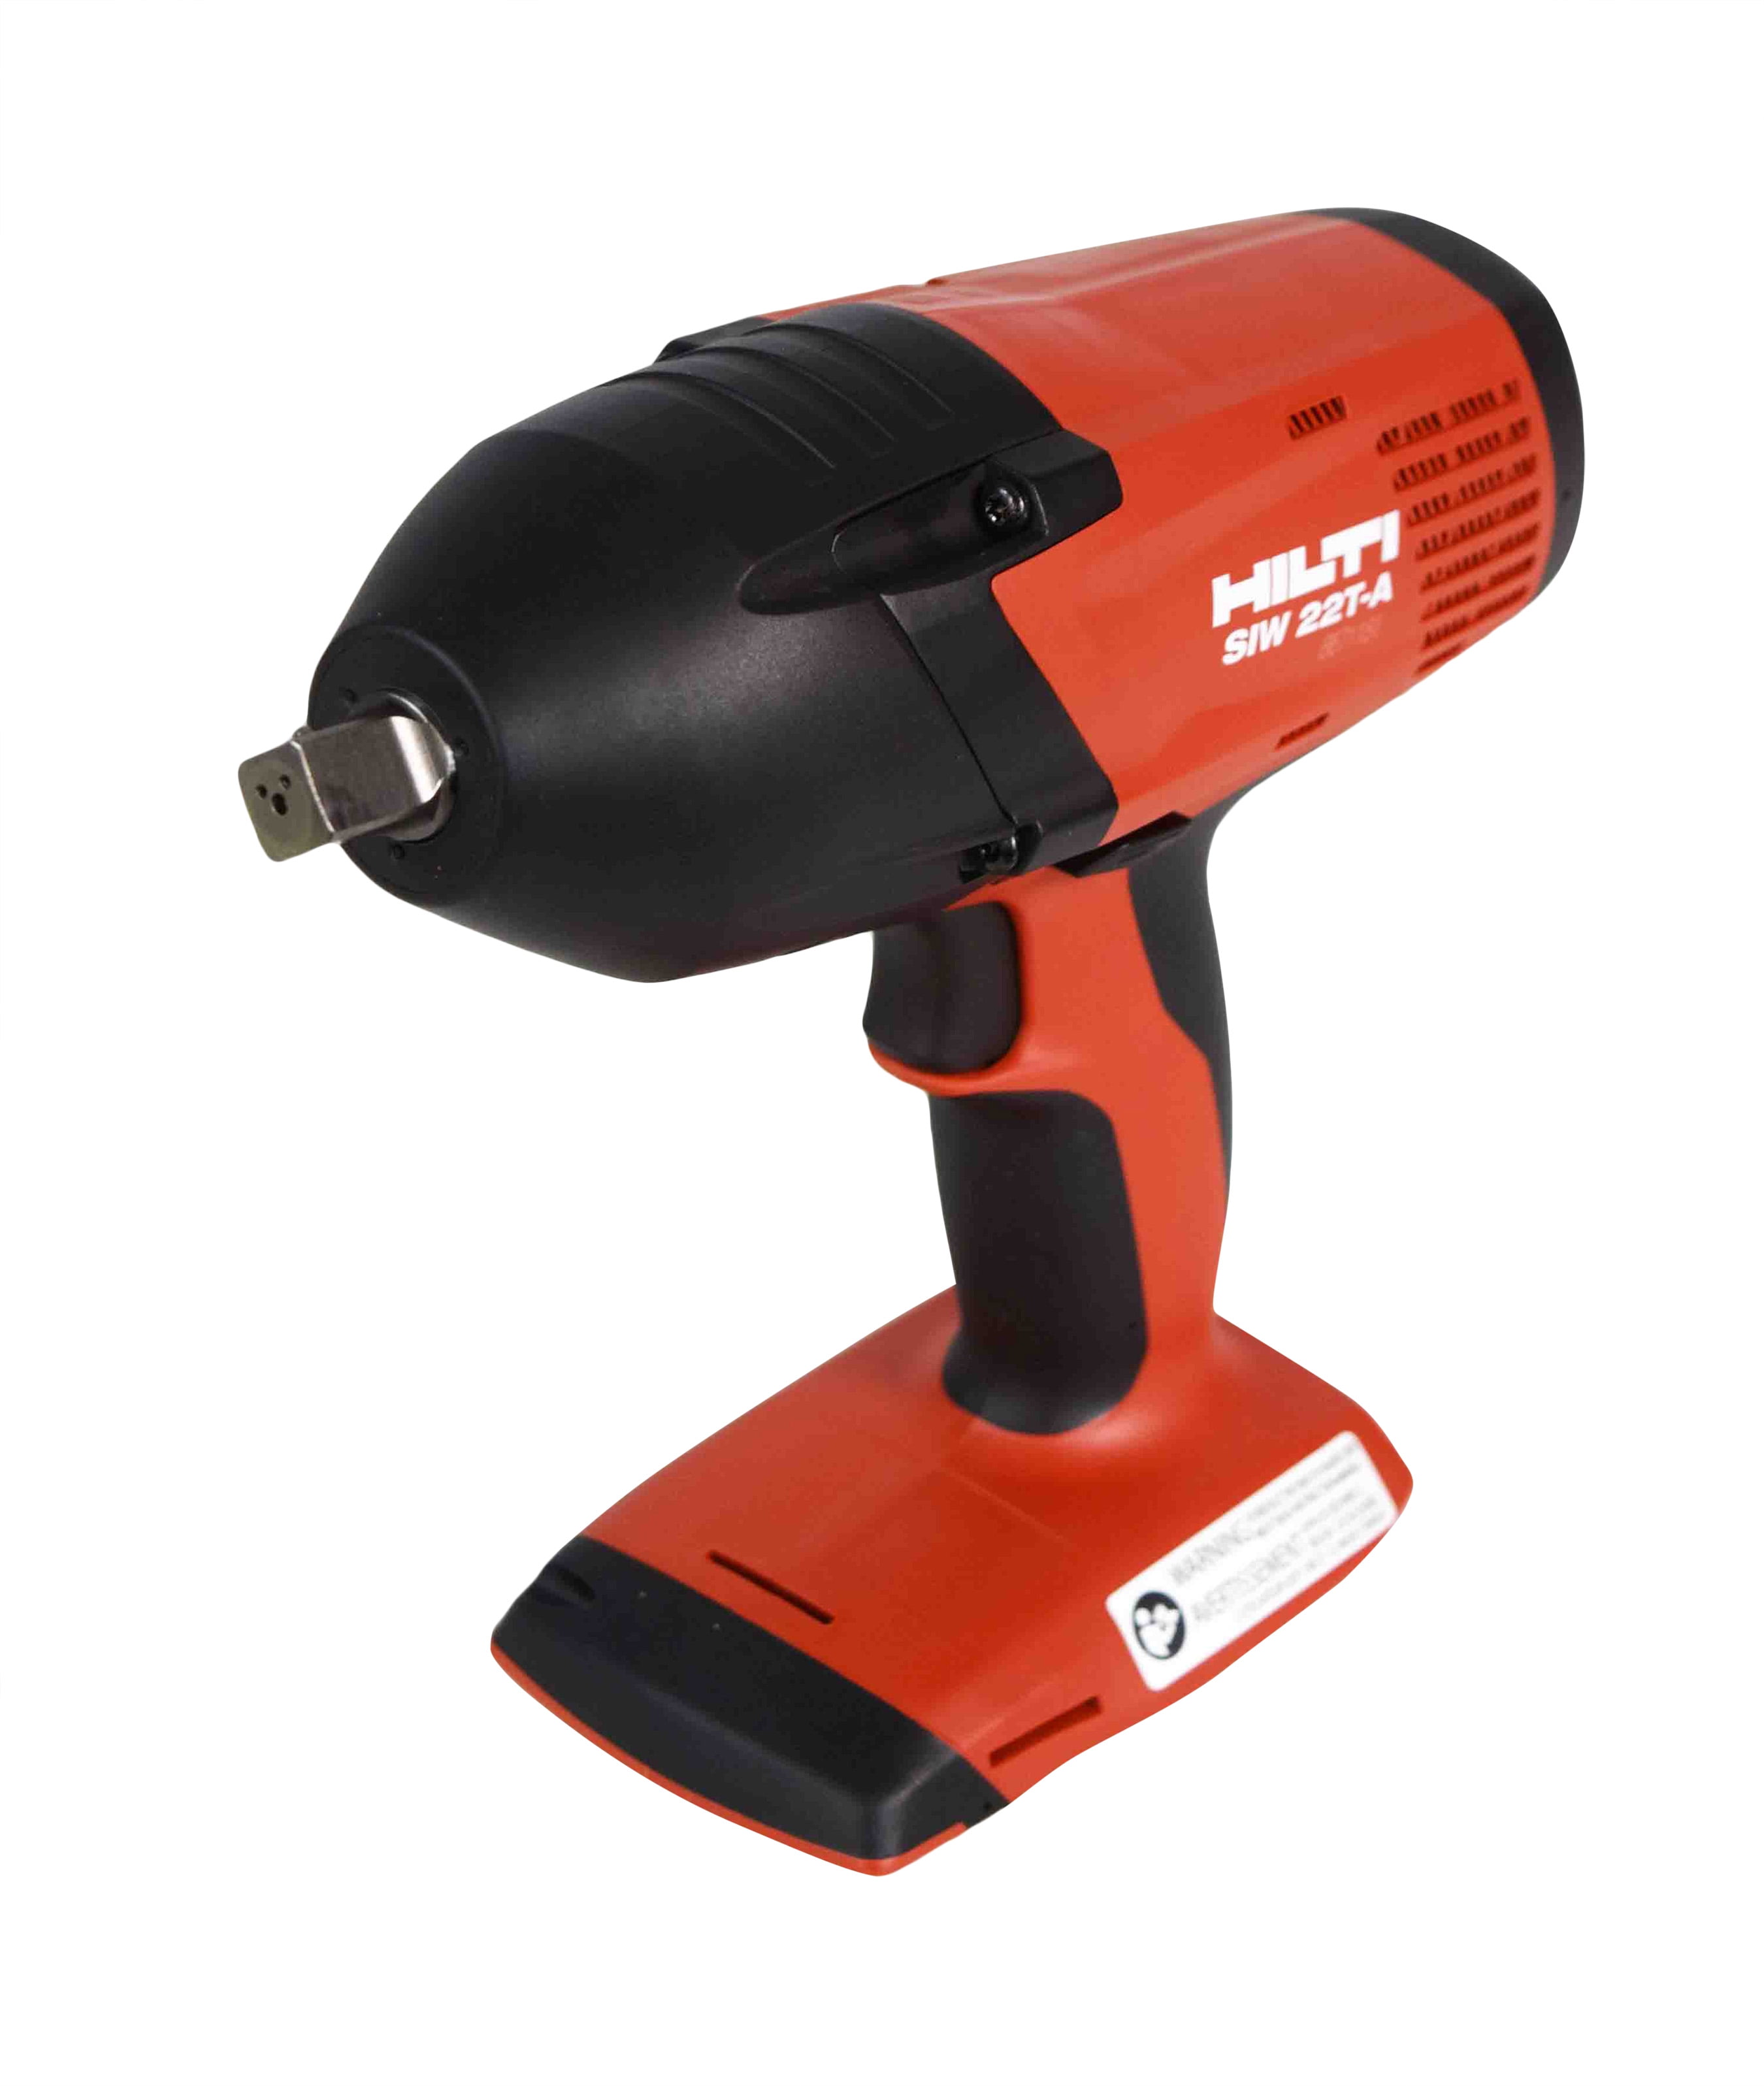 Hilti SIW 22T-A 22-Volt Lithium-Ion Cordless 1/2 in. Impact Wrench Bare Tool